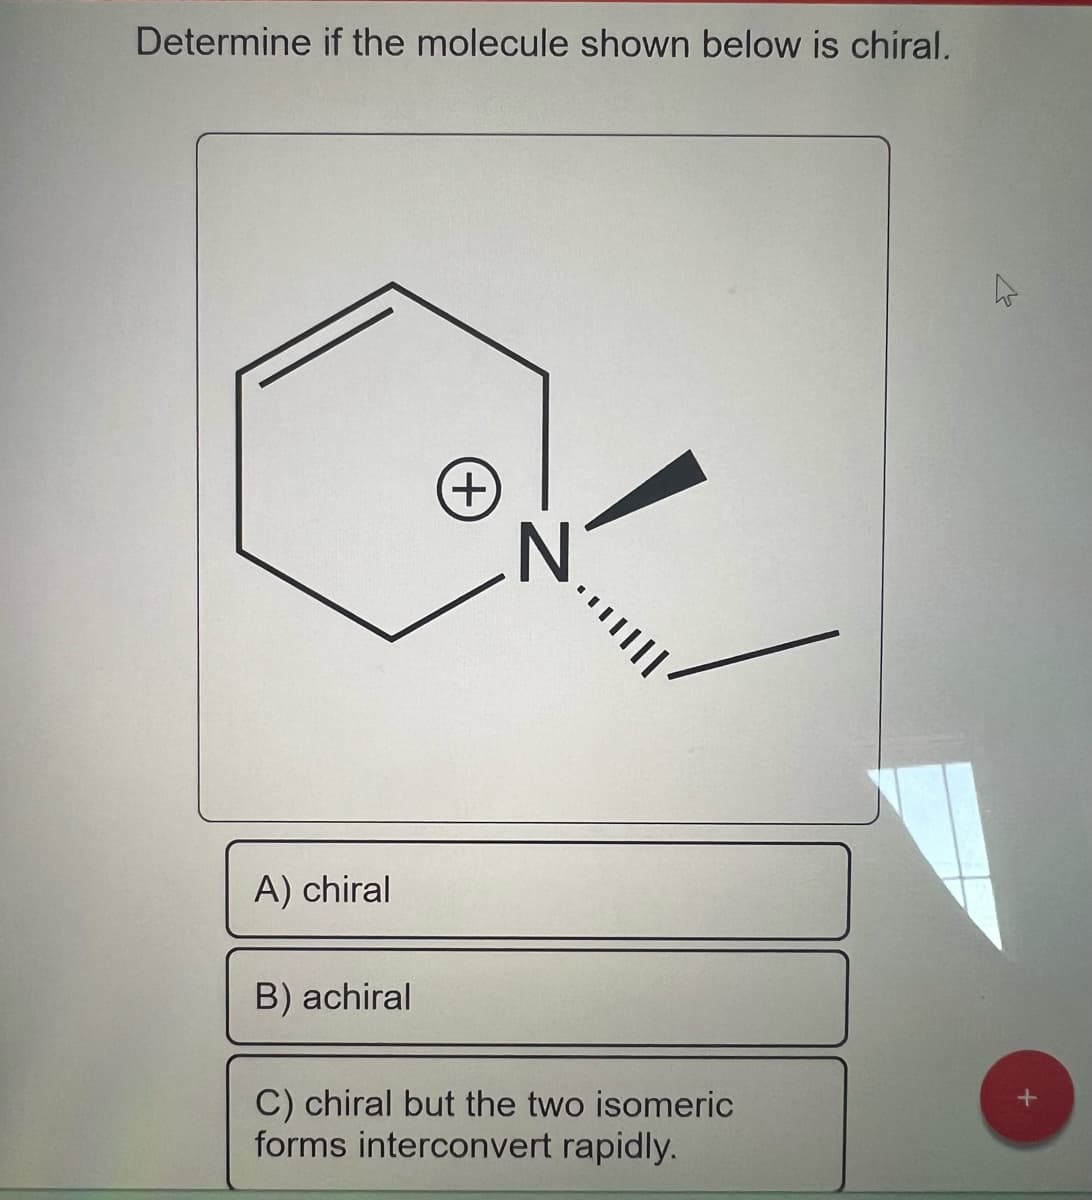 Determine if the molecule shown below is chiral.
A) chiral
B) achiral
+
N
C) chiral but the two isomeric
forms interconvert rapidly.
4
+